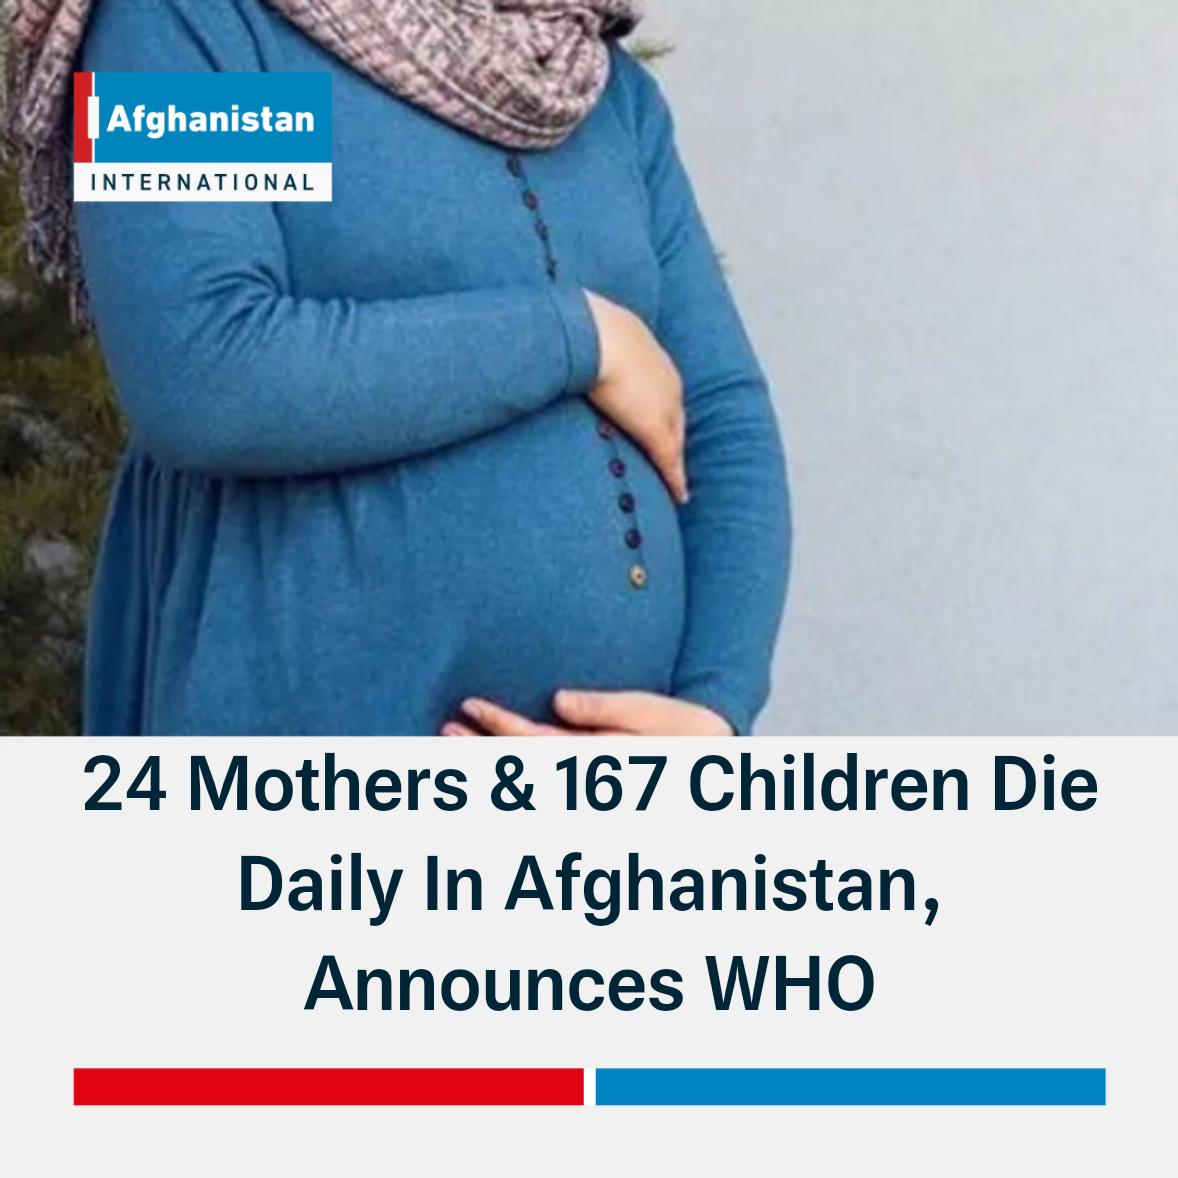 24 Mothers & 167 Children Die Daily In Afghanistan, Announces WHO ...